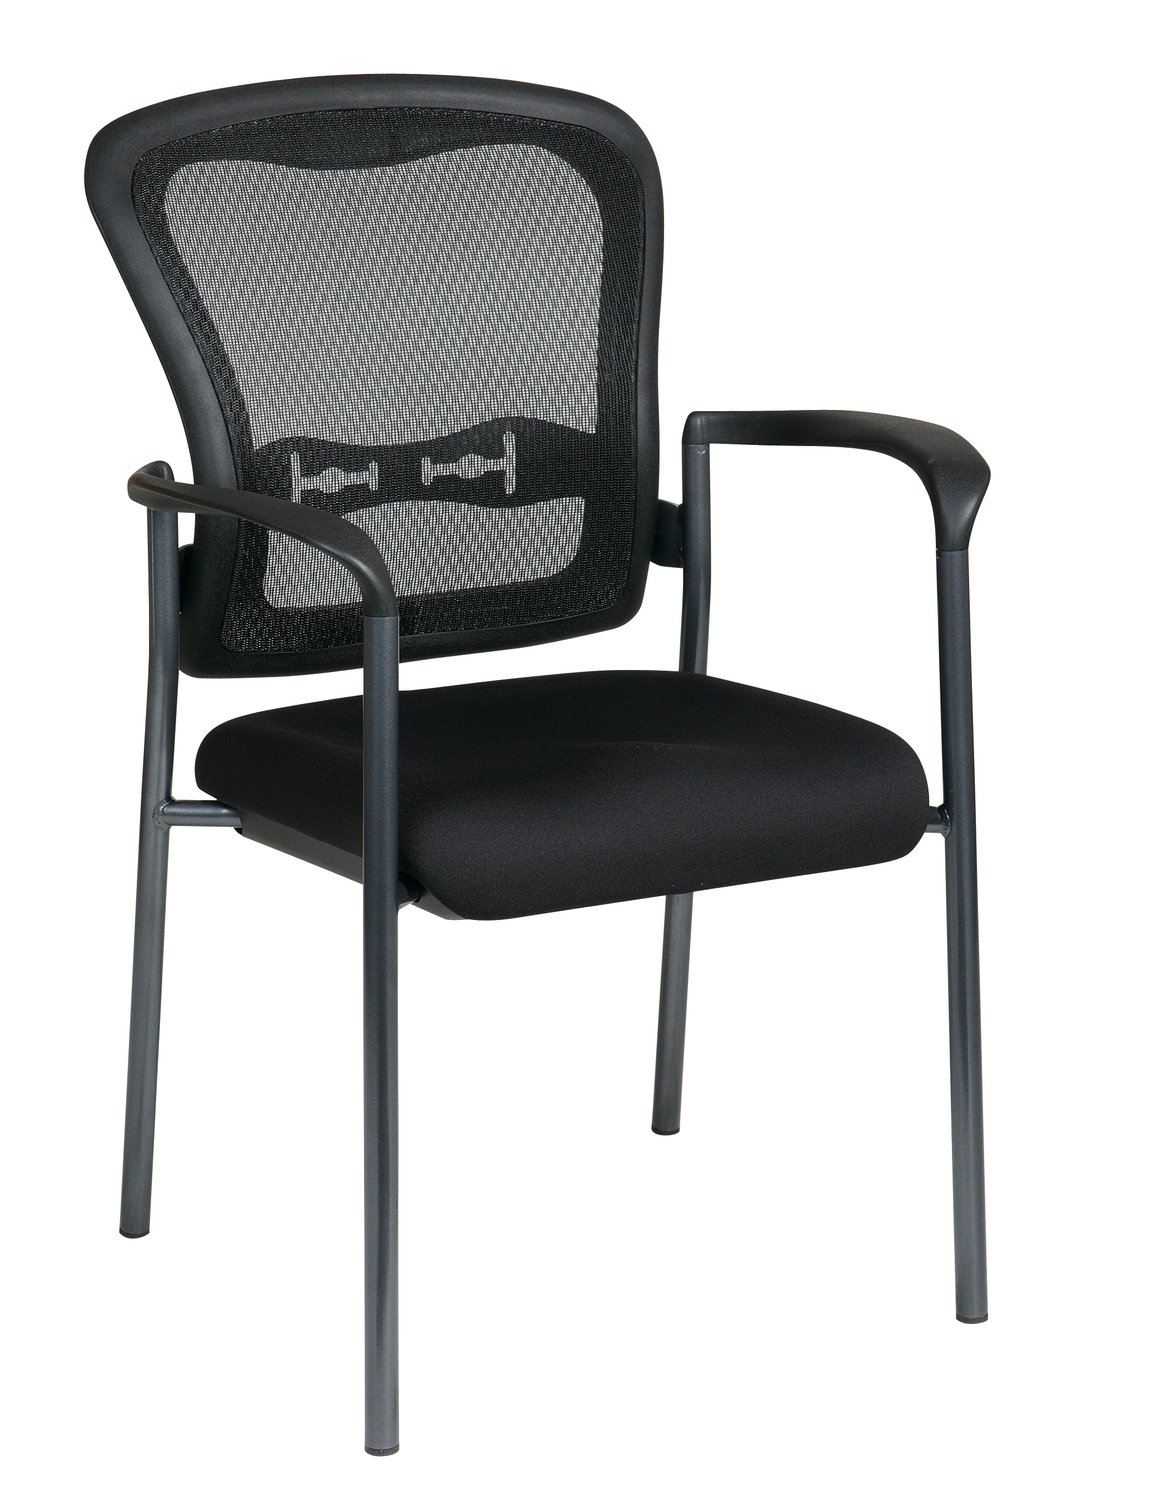 TITANIUM FINISH VISITORS CHAIR WITH ARMS AND PROGRID® BACK